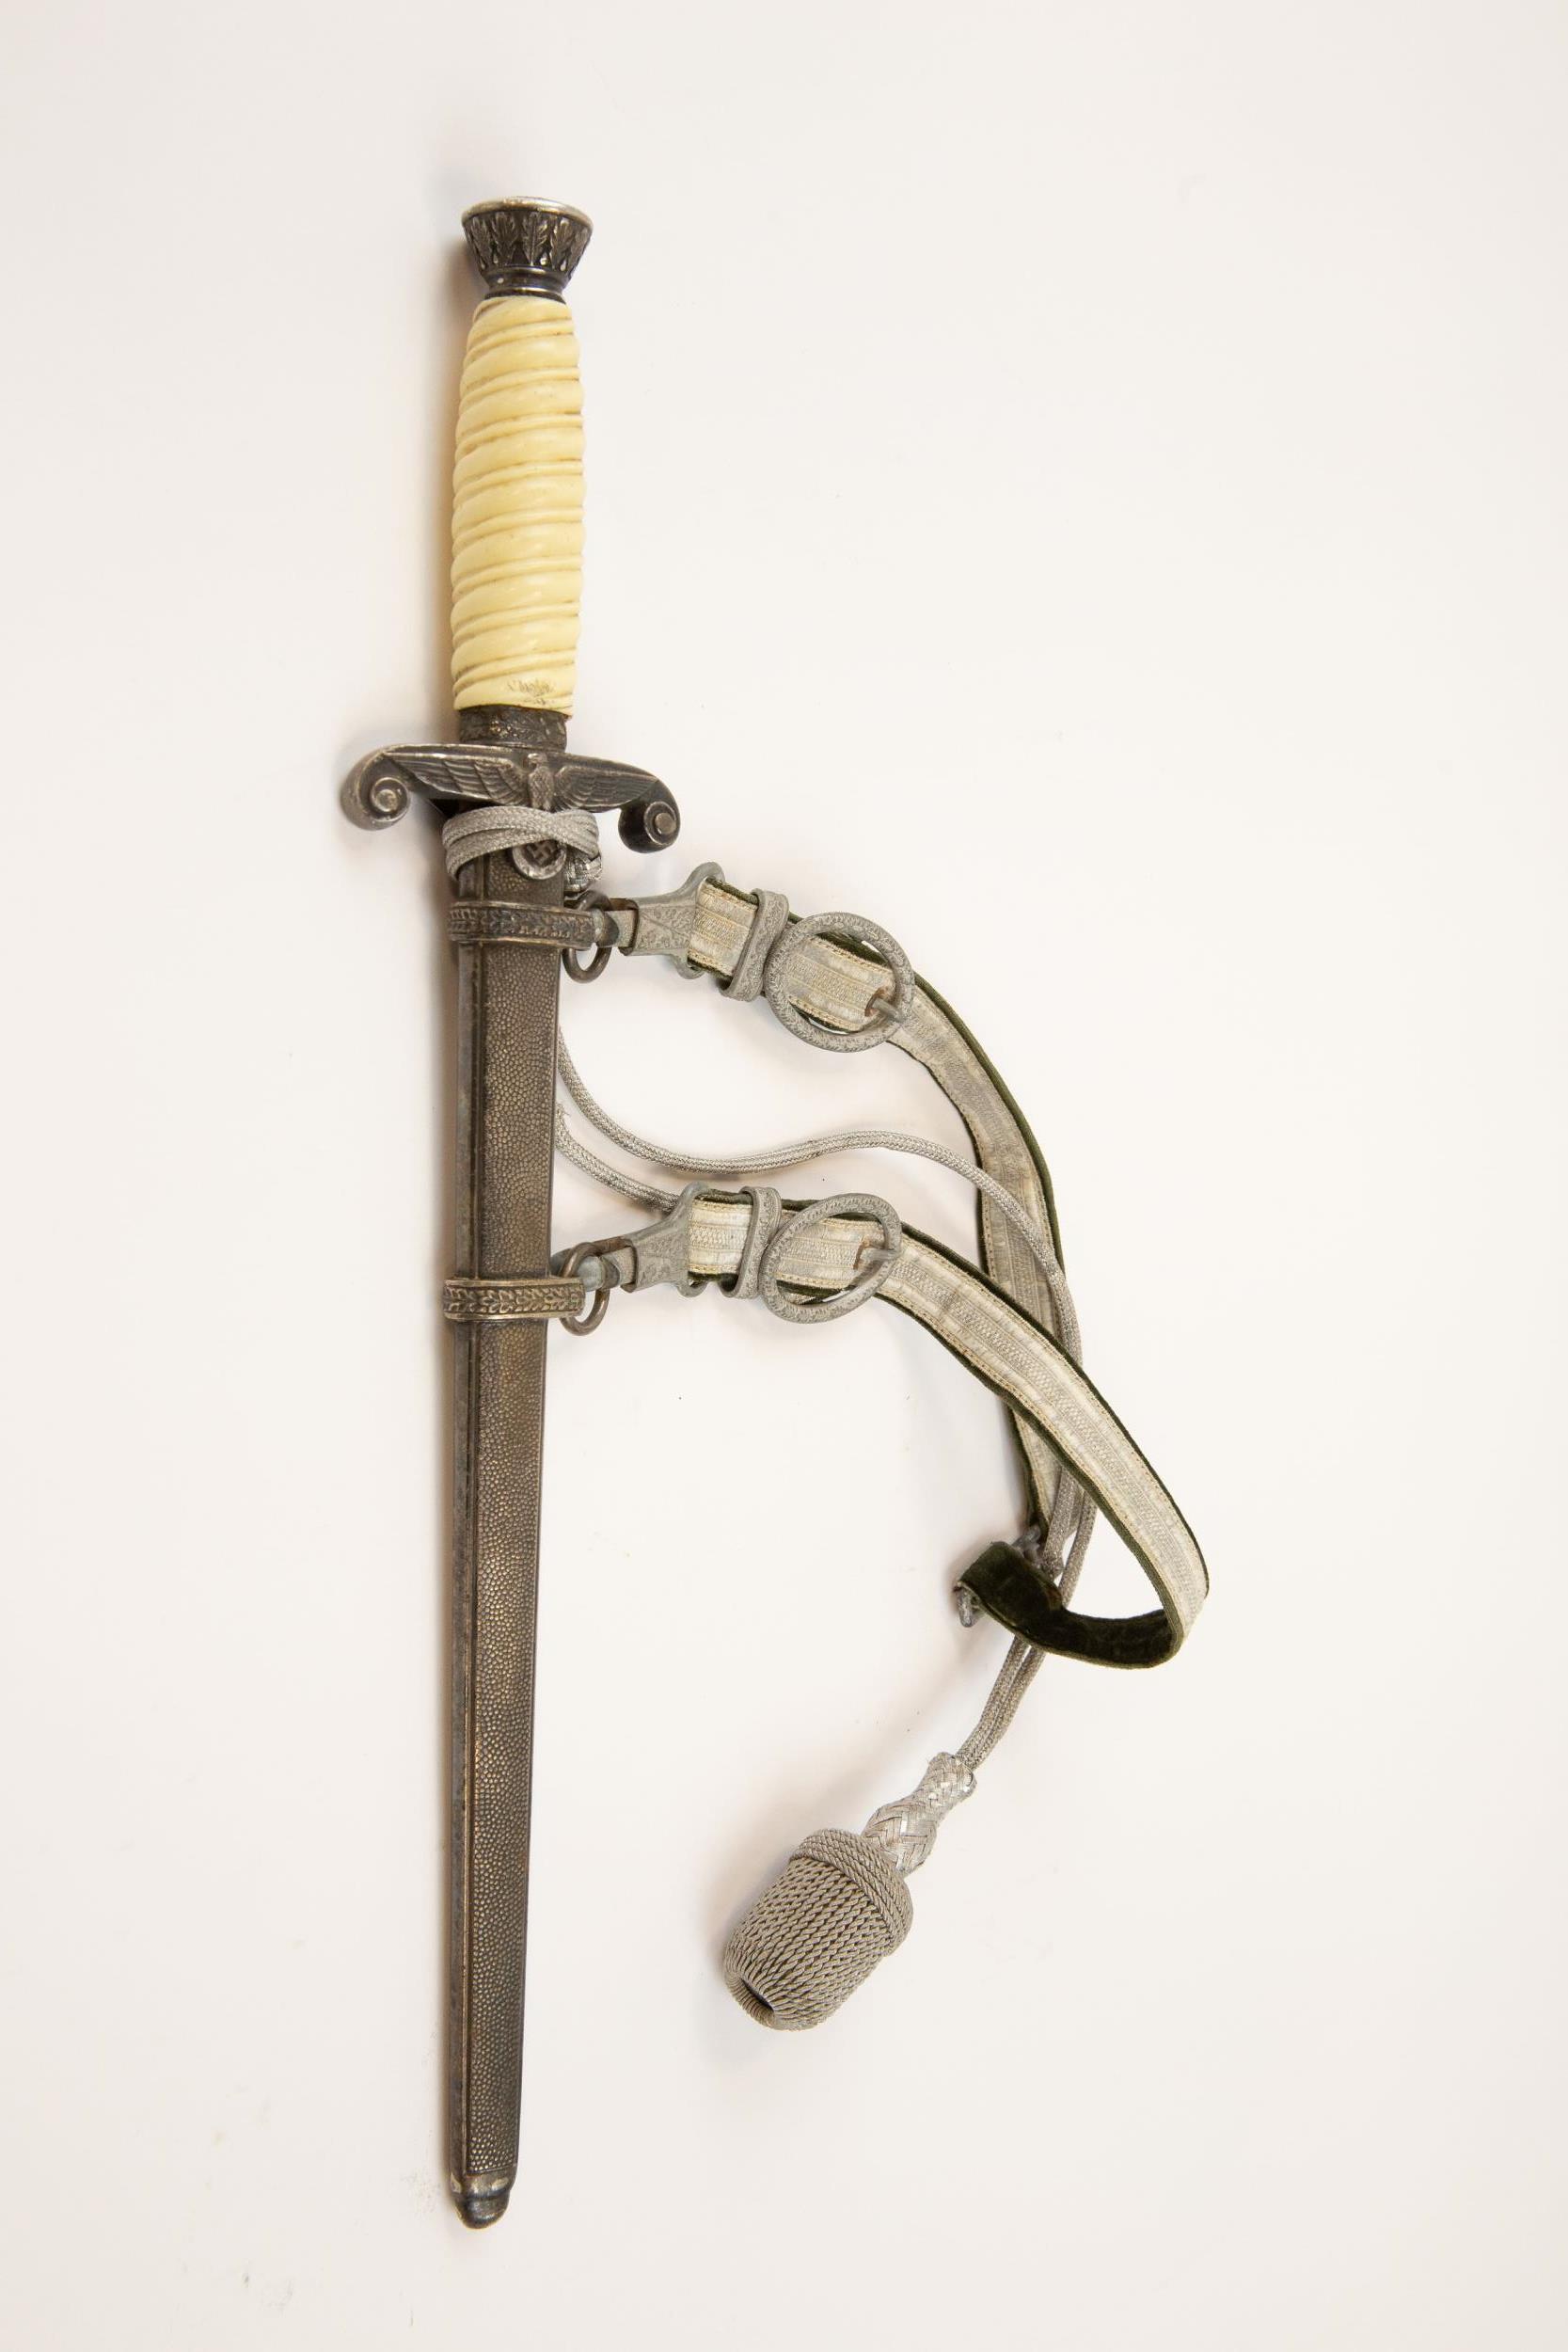 A Third Reich Army officer's dagger, by Alcoso, Solingen, with silver plated hilt and scabbard,